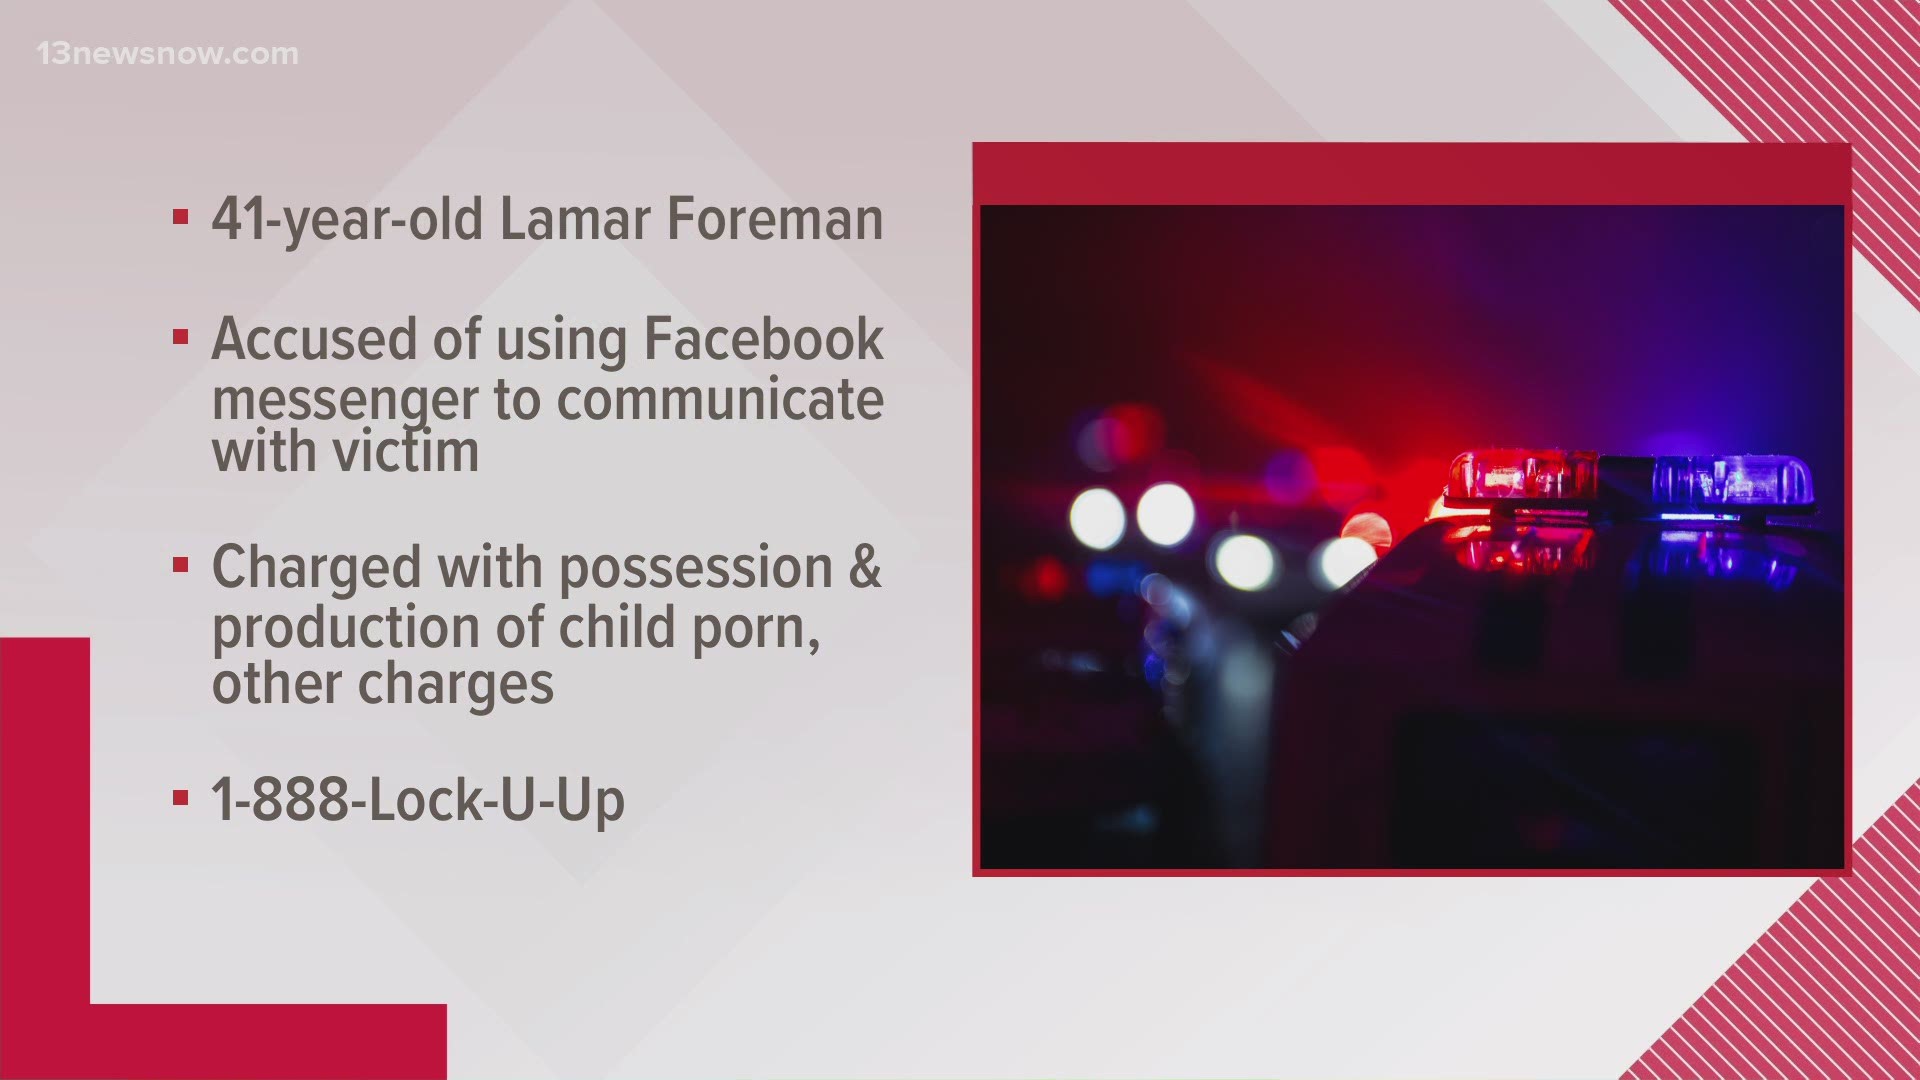 In Norfolk, Lamar Foreman, 41, is in jail after being accused of using Facebook messenger to talk to a victim. He's being charged with possessing child porn.